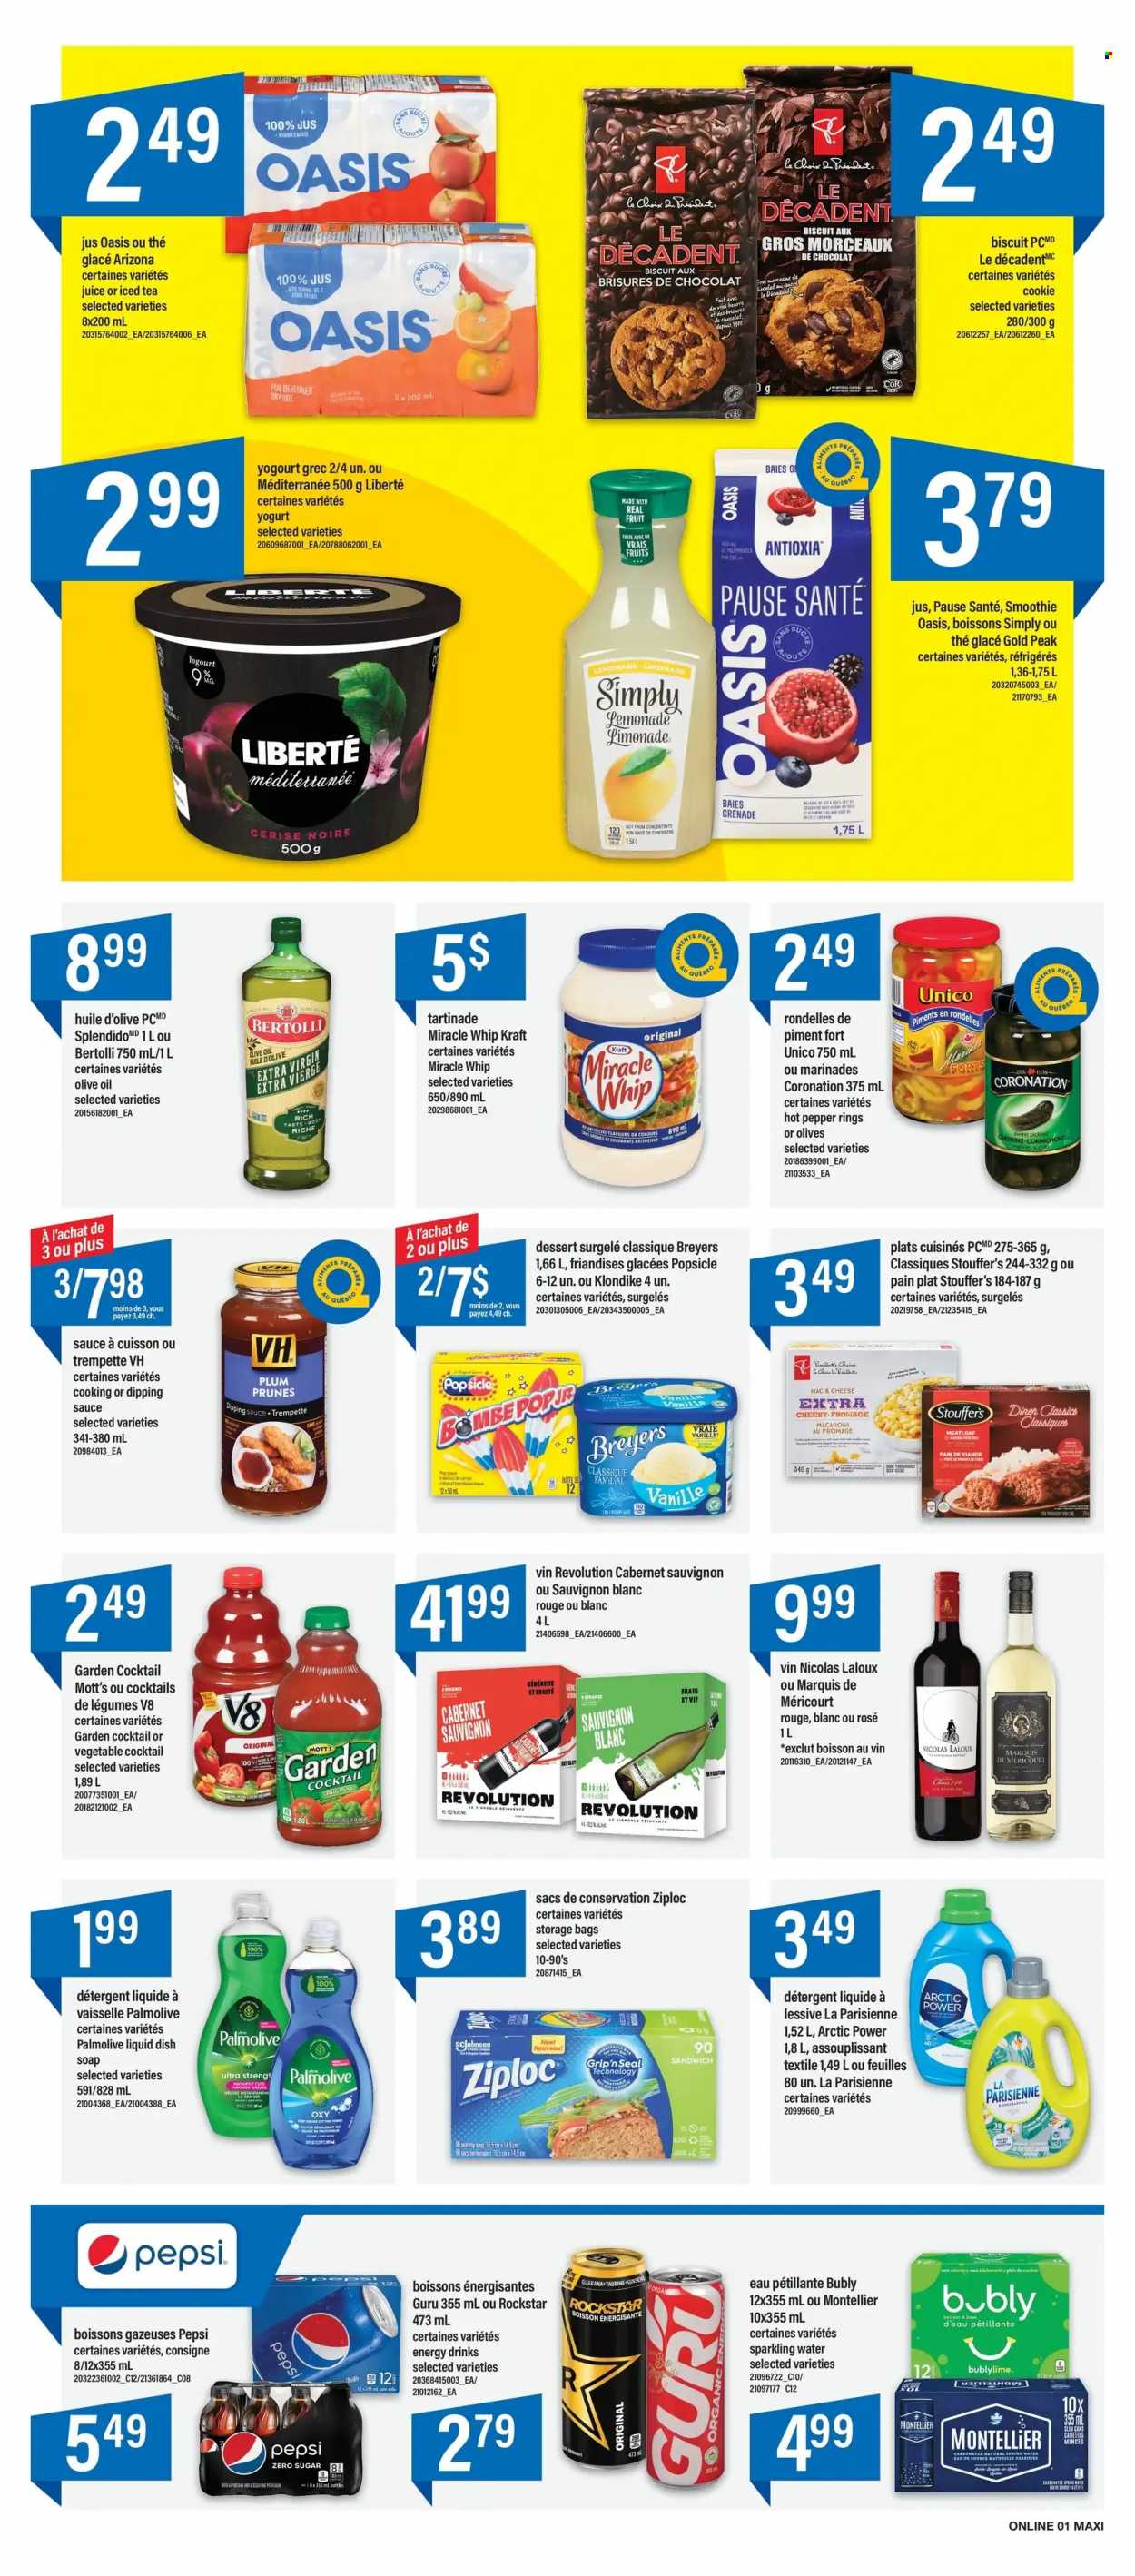 thumbnail - Maxi & Cie Flyer - May 12, 2022 - May 18, 2022 - Sales products - Mott's, sandwich, macaroni, sauce, meatloaf, Kraft®, Bertolli, yoghurt, Miracle Whip, Stouffer's, biscuit, pepper, extra virgin olive oil, olive oil, oil, prunes, dried fruit, lemonade, Pepsi, juice, energy drink, ice tea, AriZona, Rockstar, smoothie, sparkling water, Cabernet Sauvignon, white wine, Sauvignon Blanc, rosé wine, Palmolive, soap, bag, Ziploc, detergent, olives, oranges. Page 7.